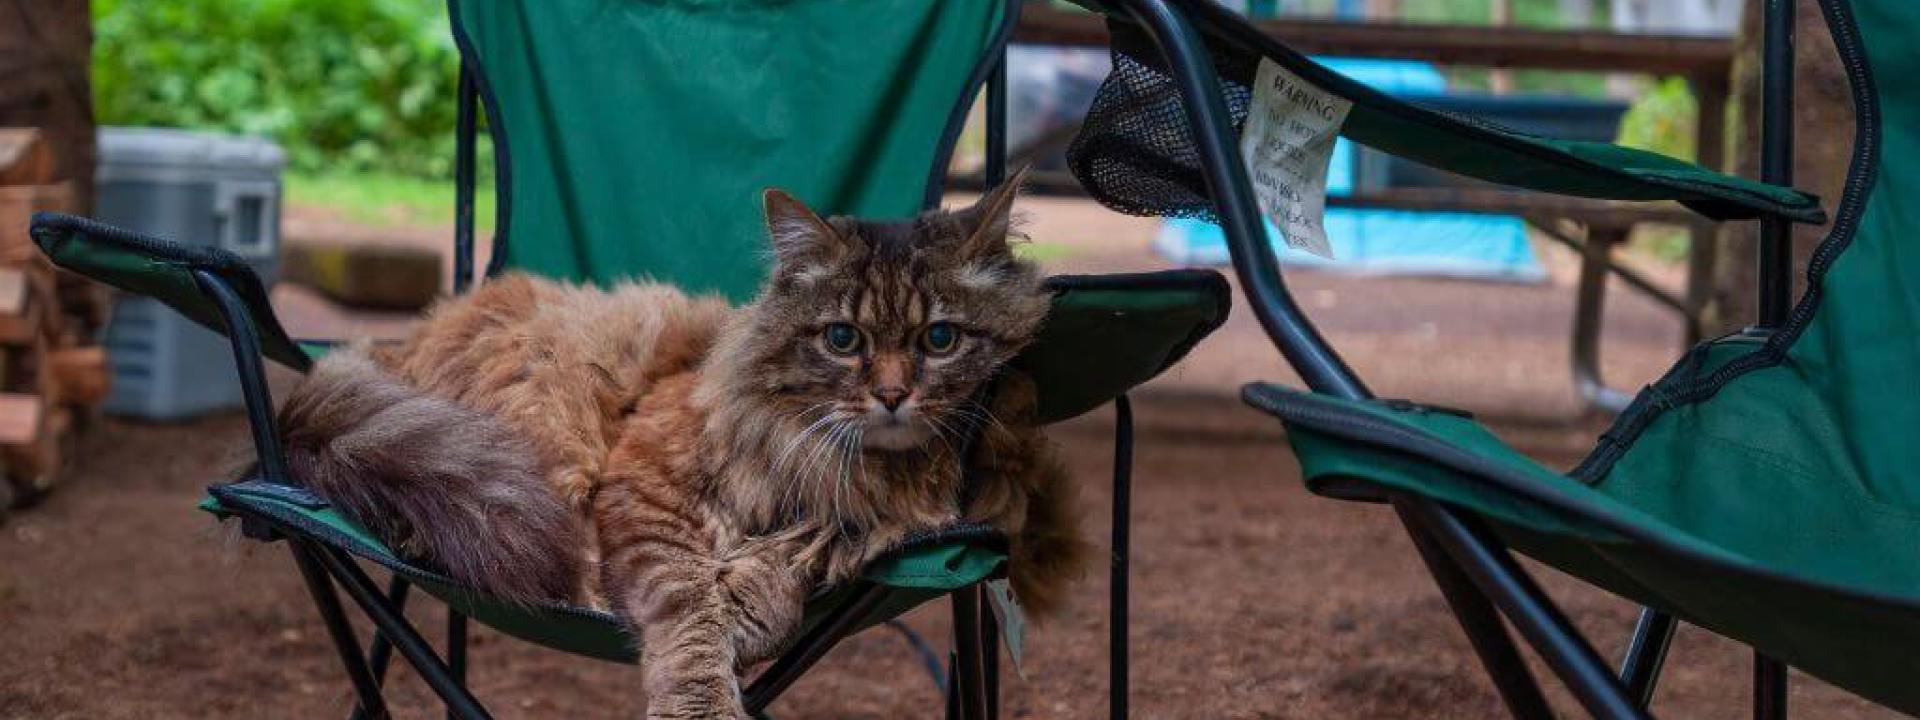 National Camping Month: A Guide to Camping Safely With Pets